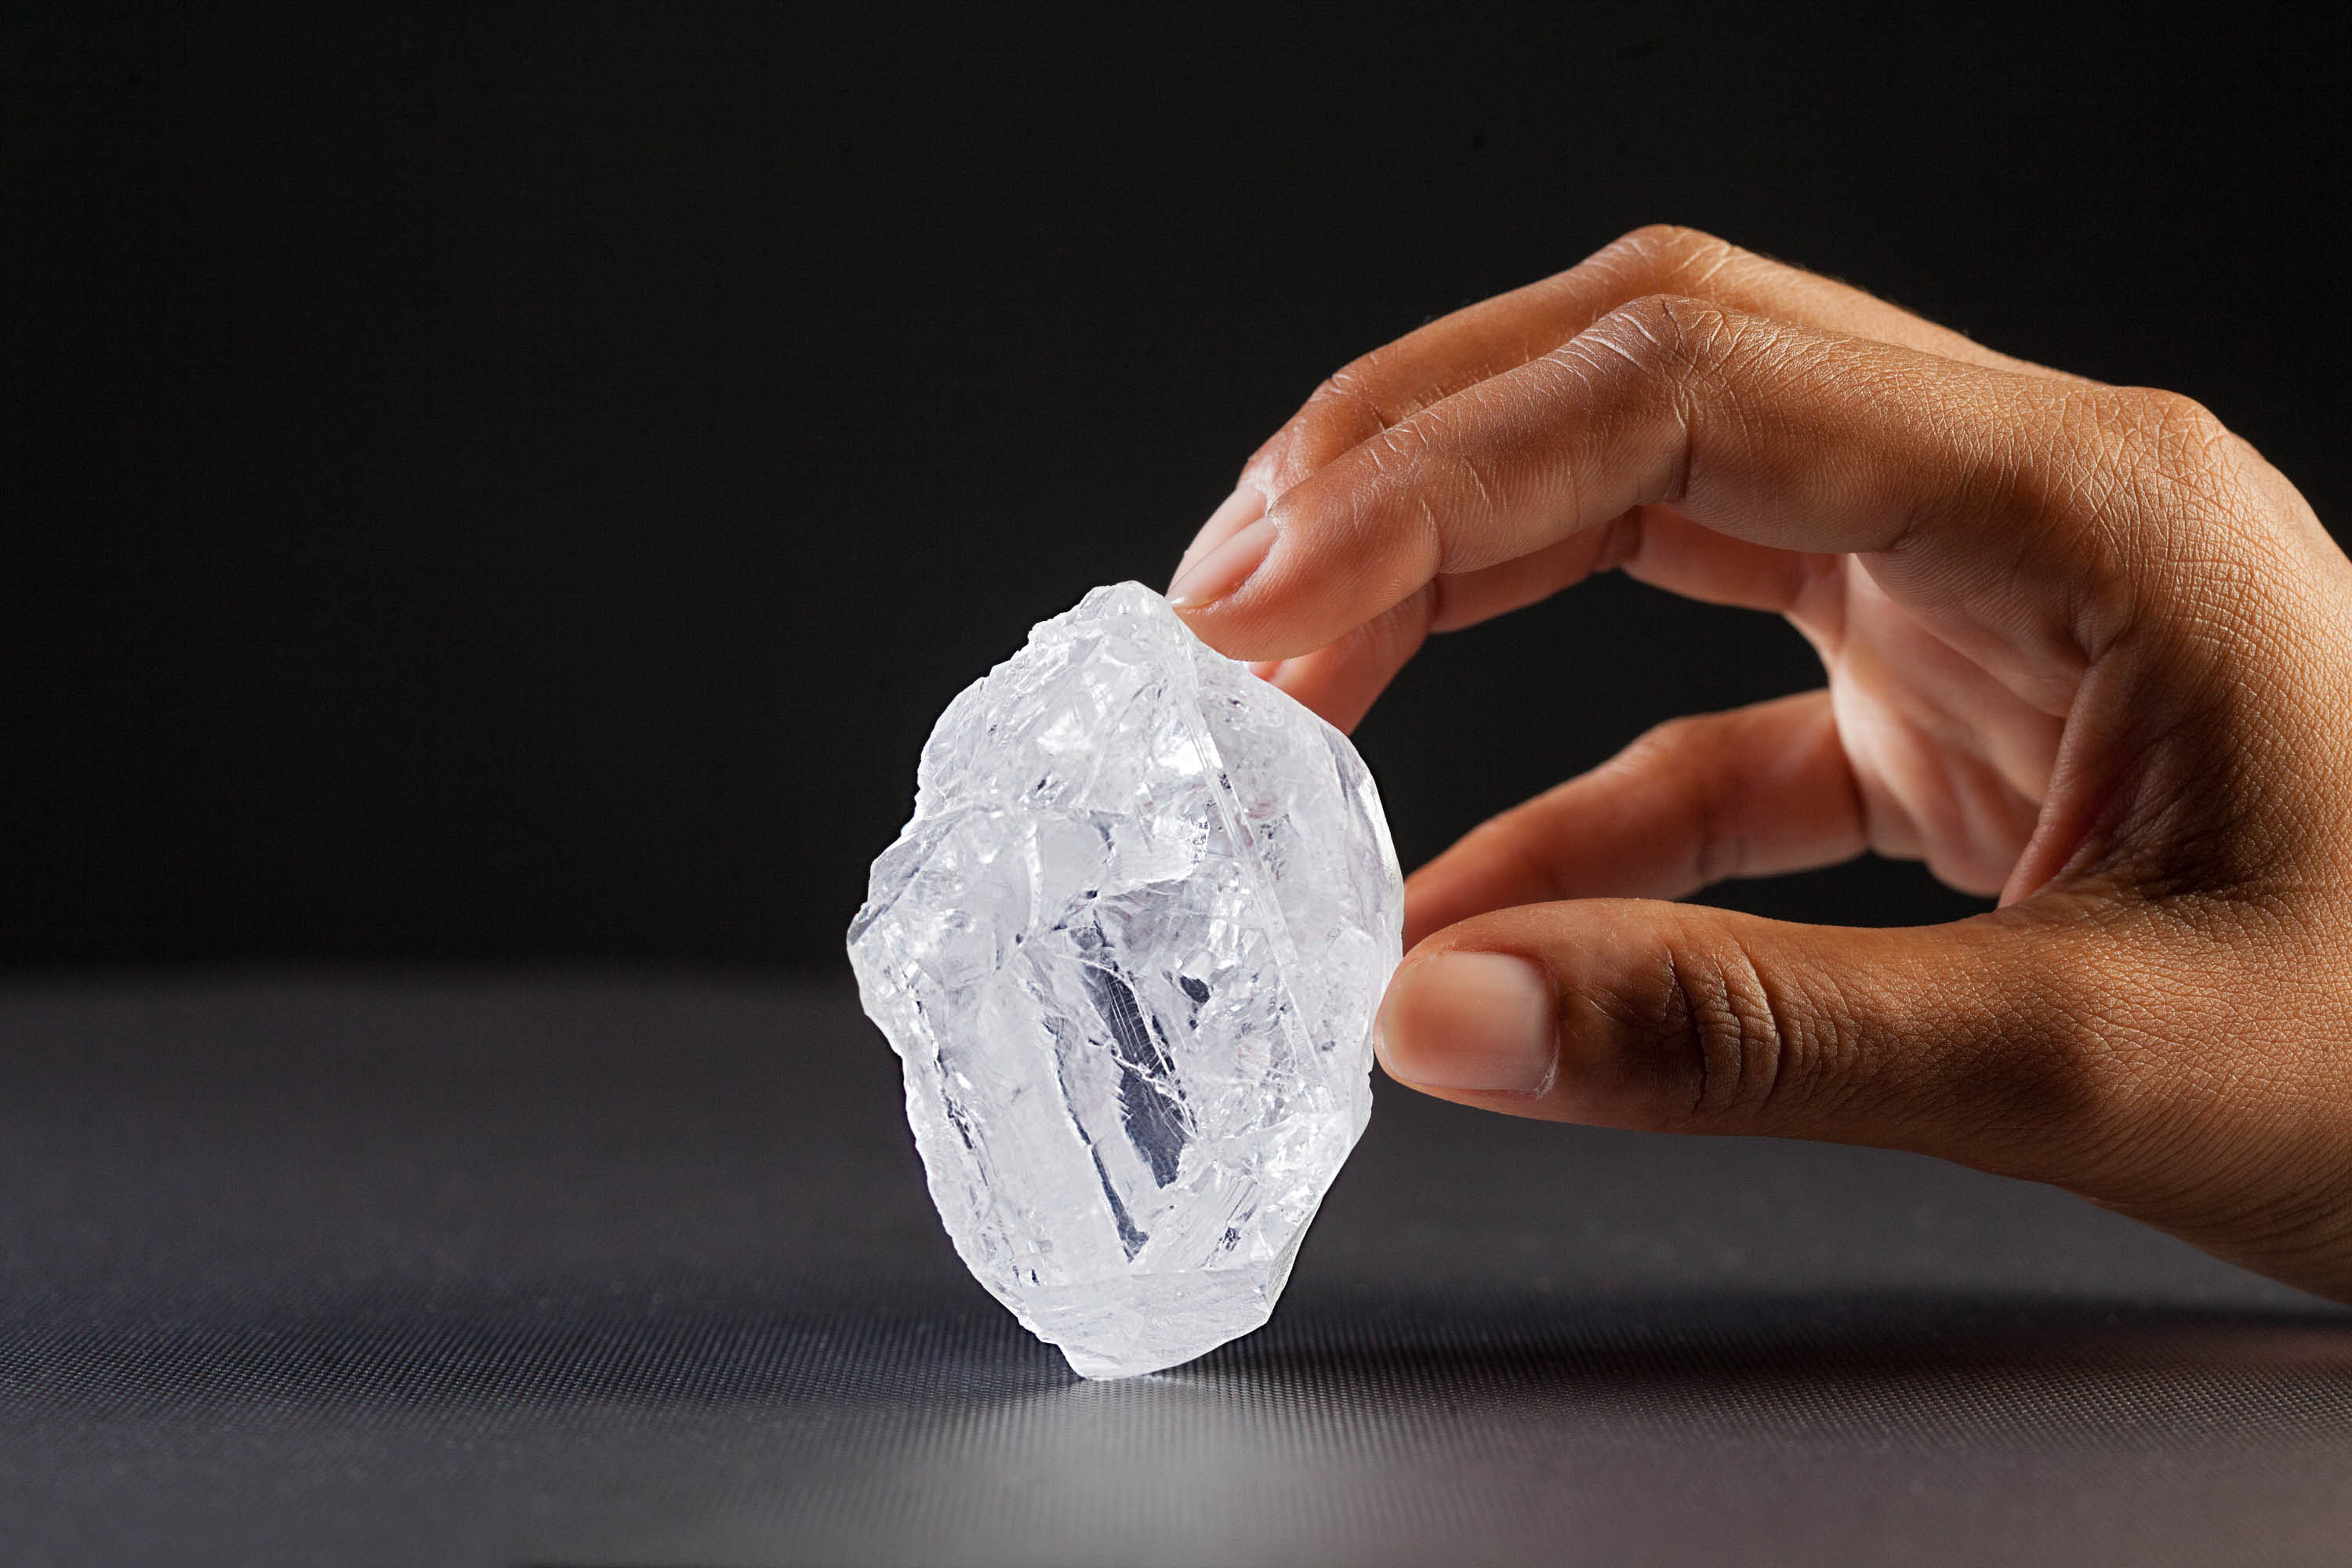 This 1109-Carat Diamond Was Just Sold at a Huge Discount